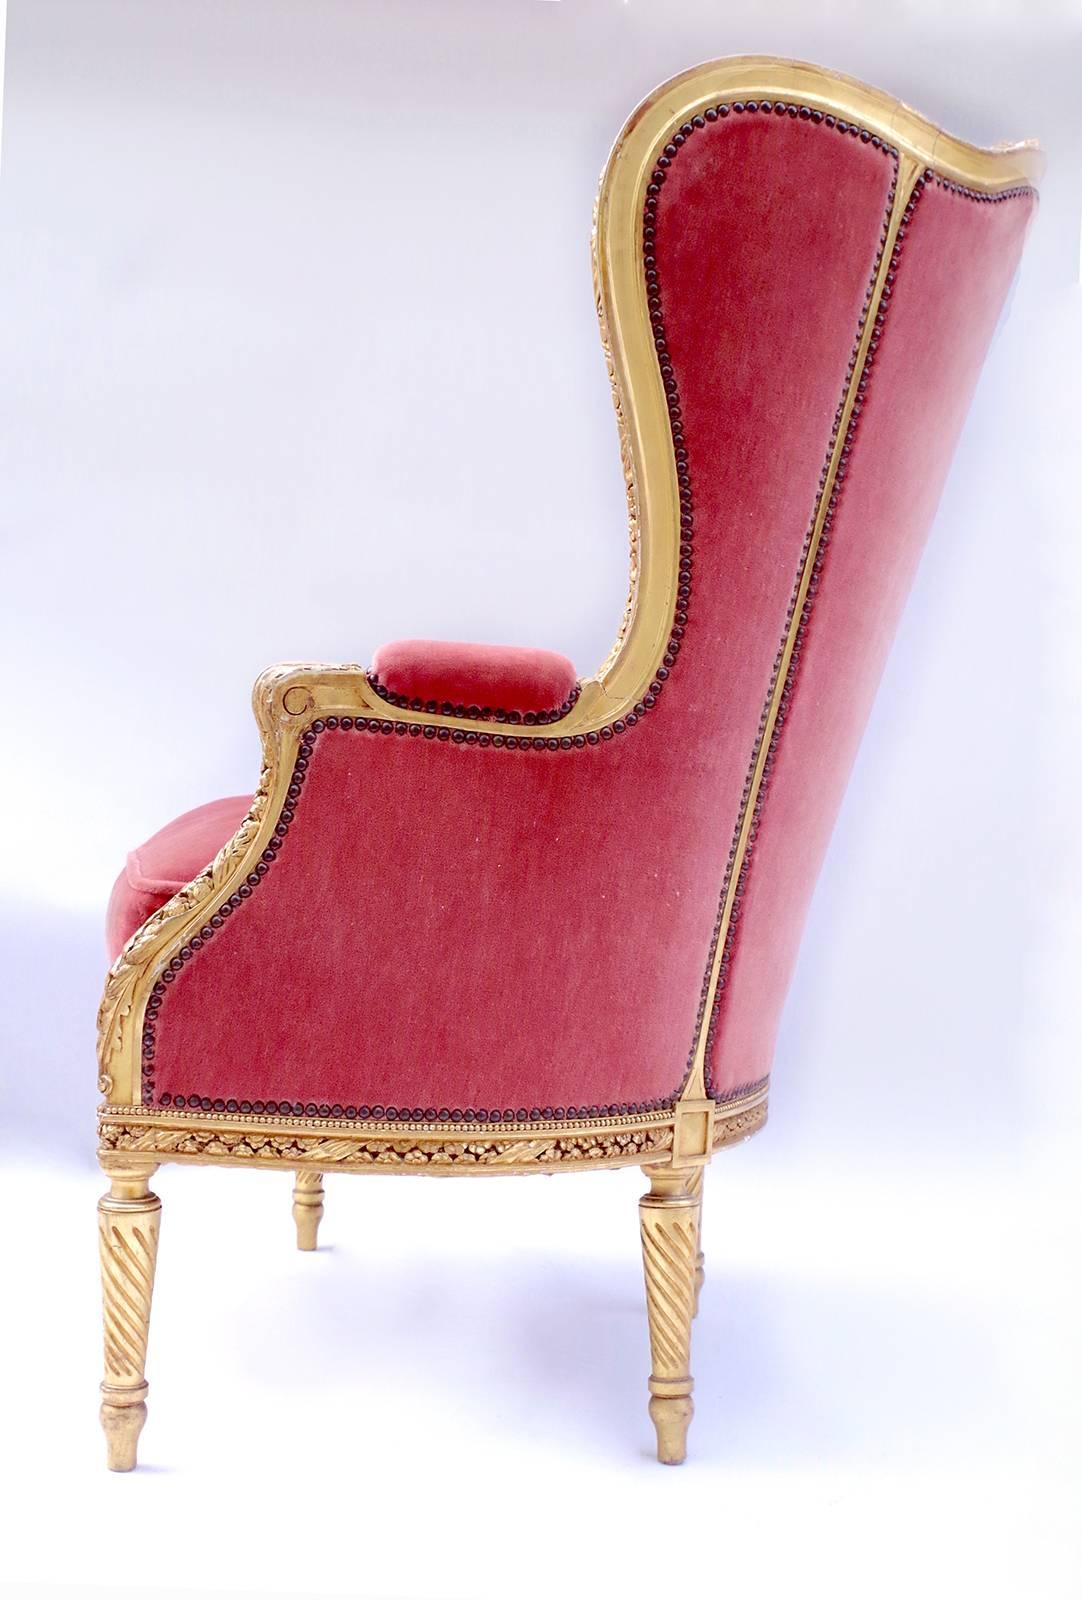 French Large Transition Style Giltwood Wing Chair, circa 1900